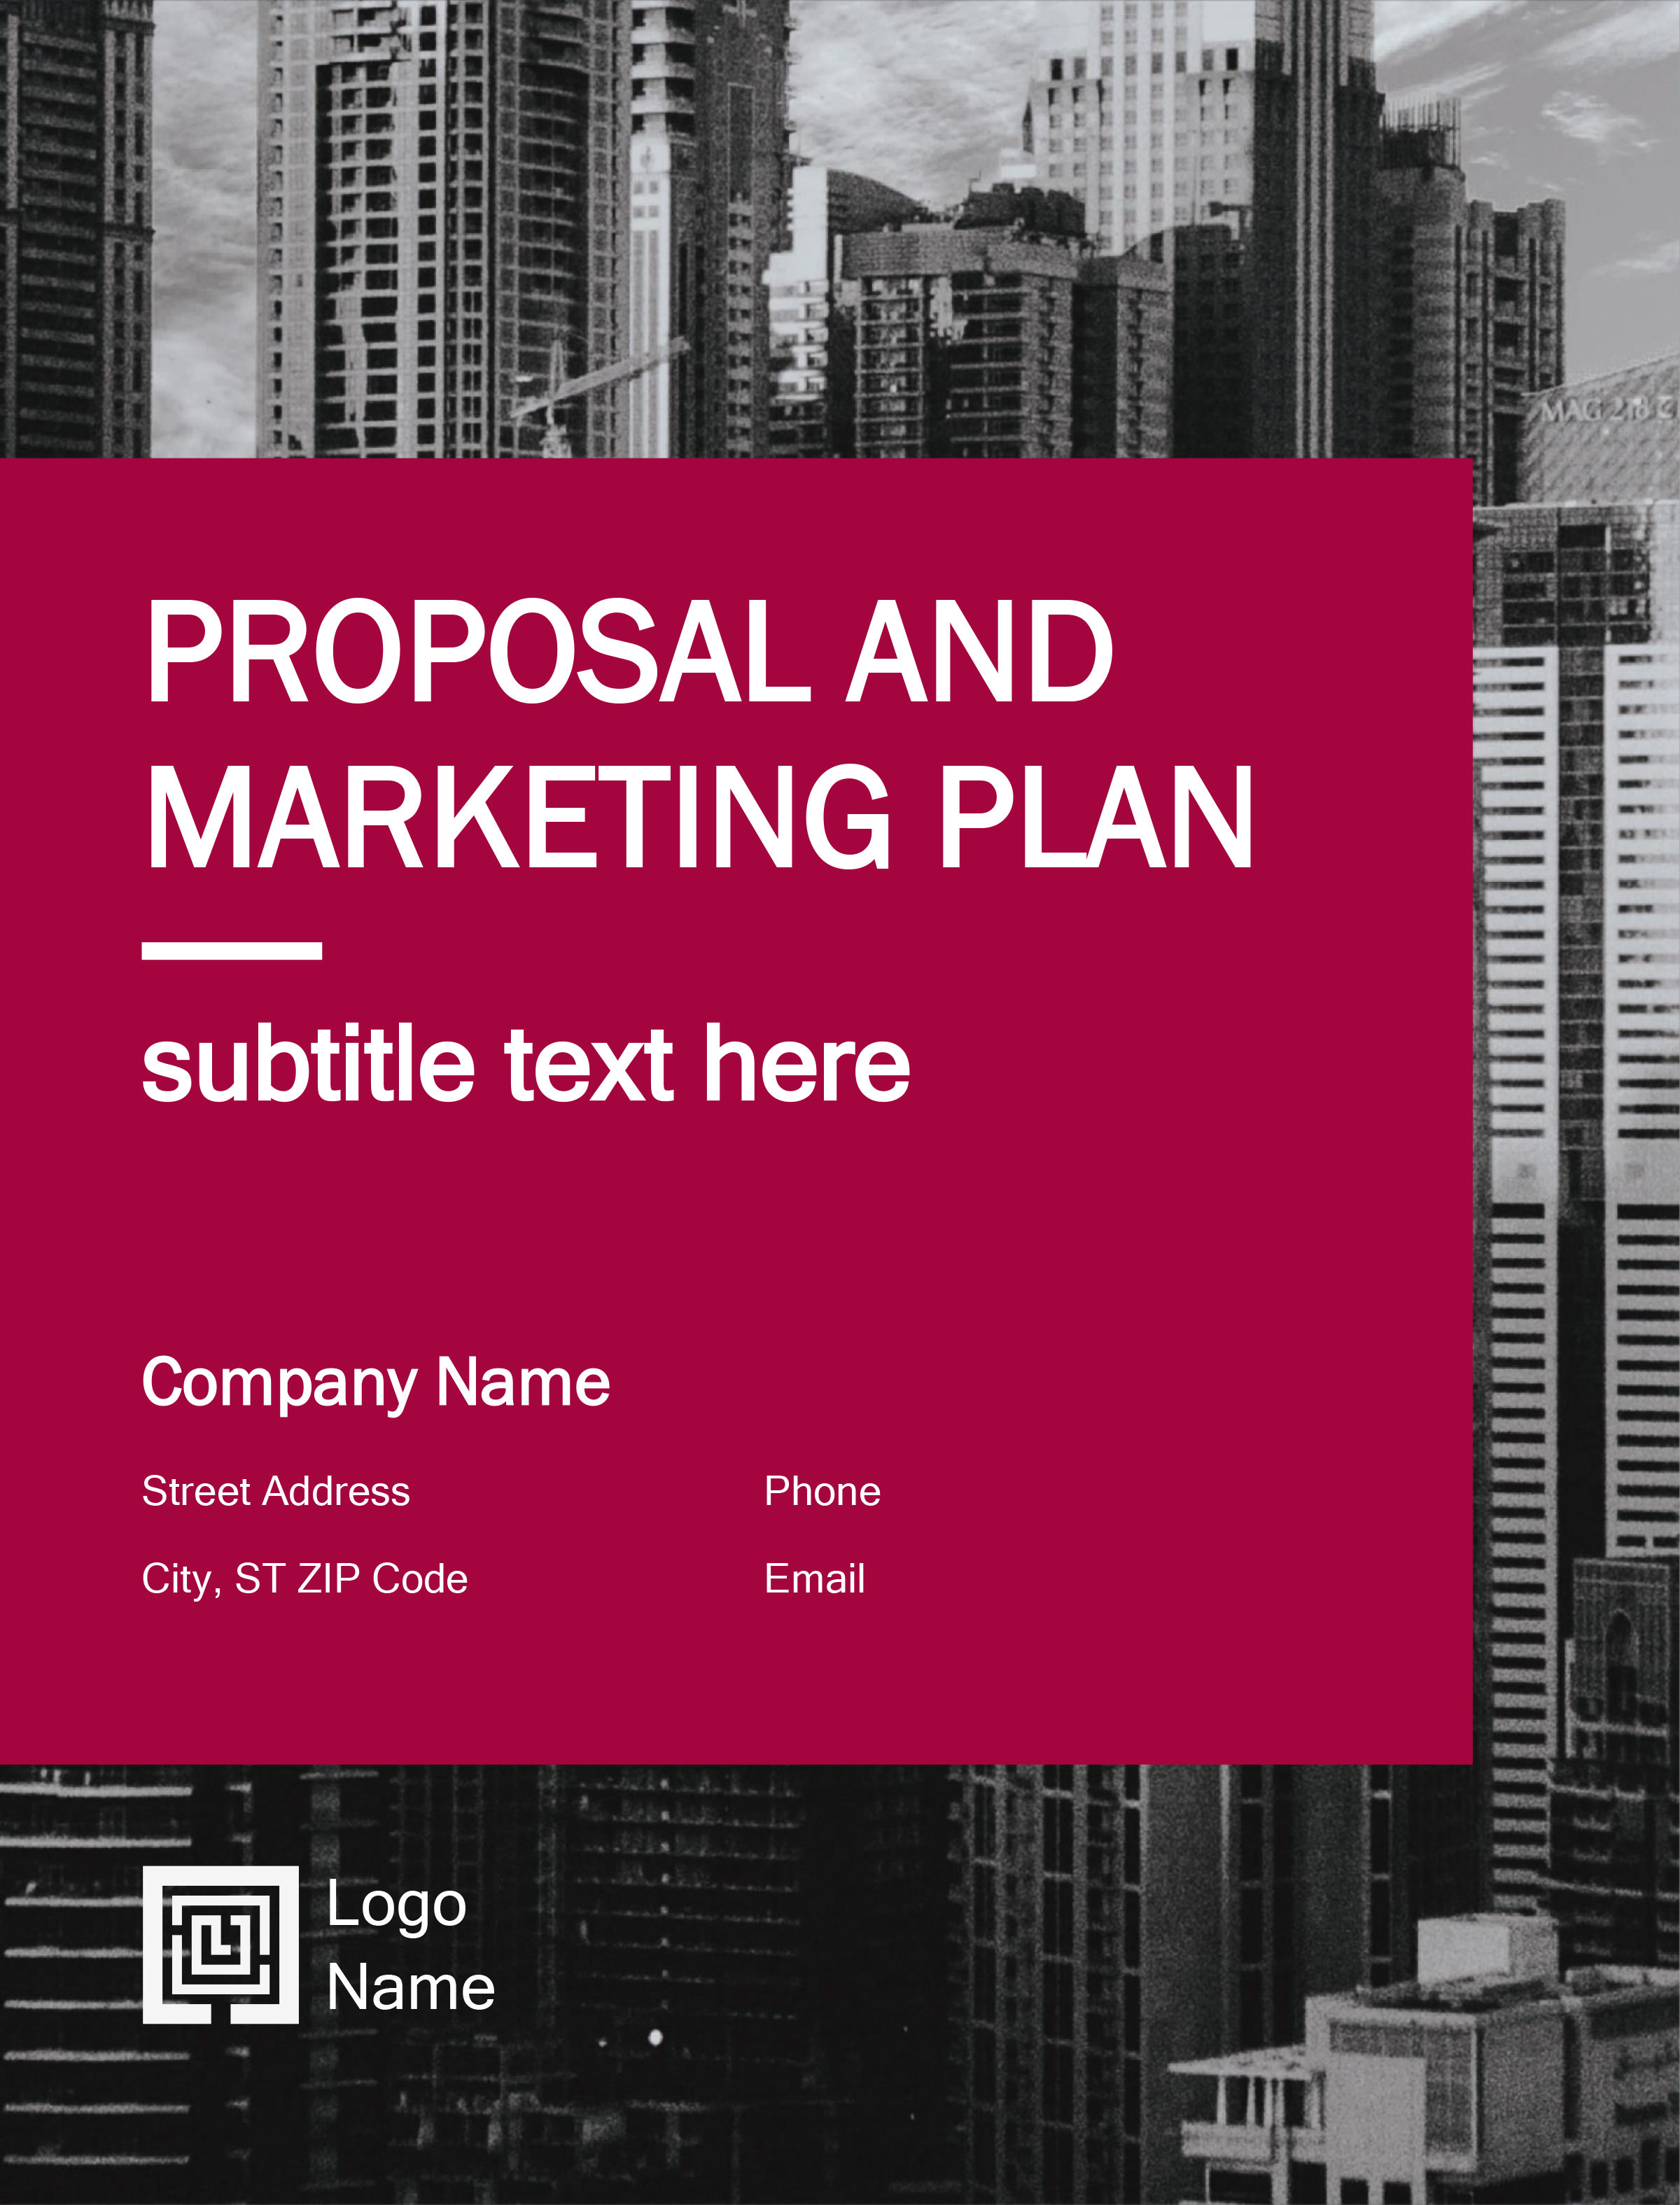 business plan free template word